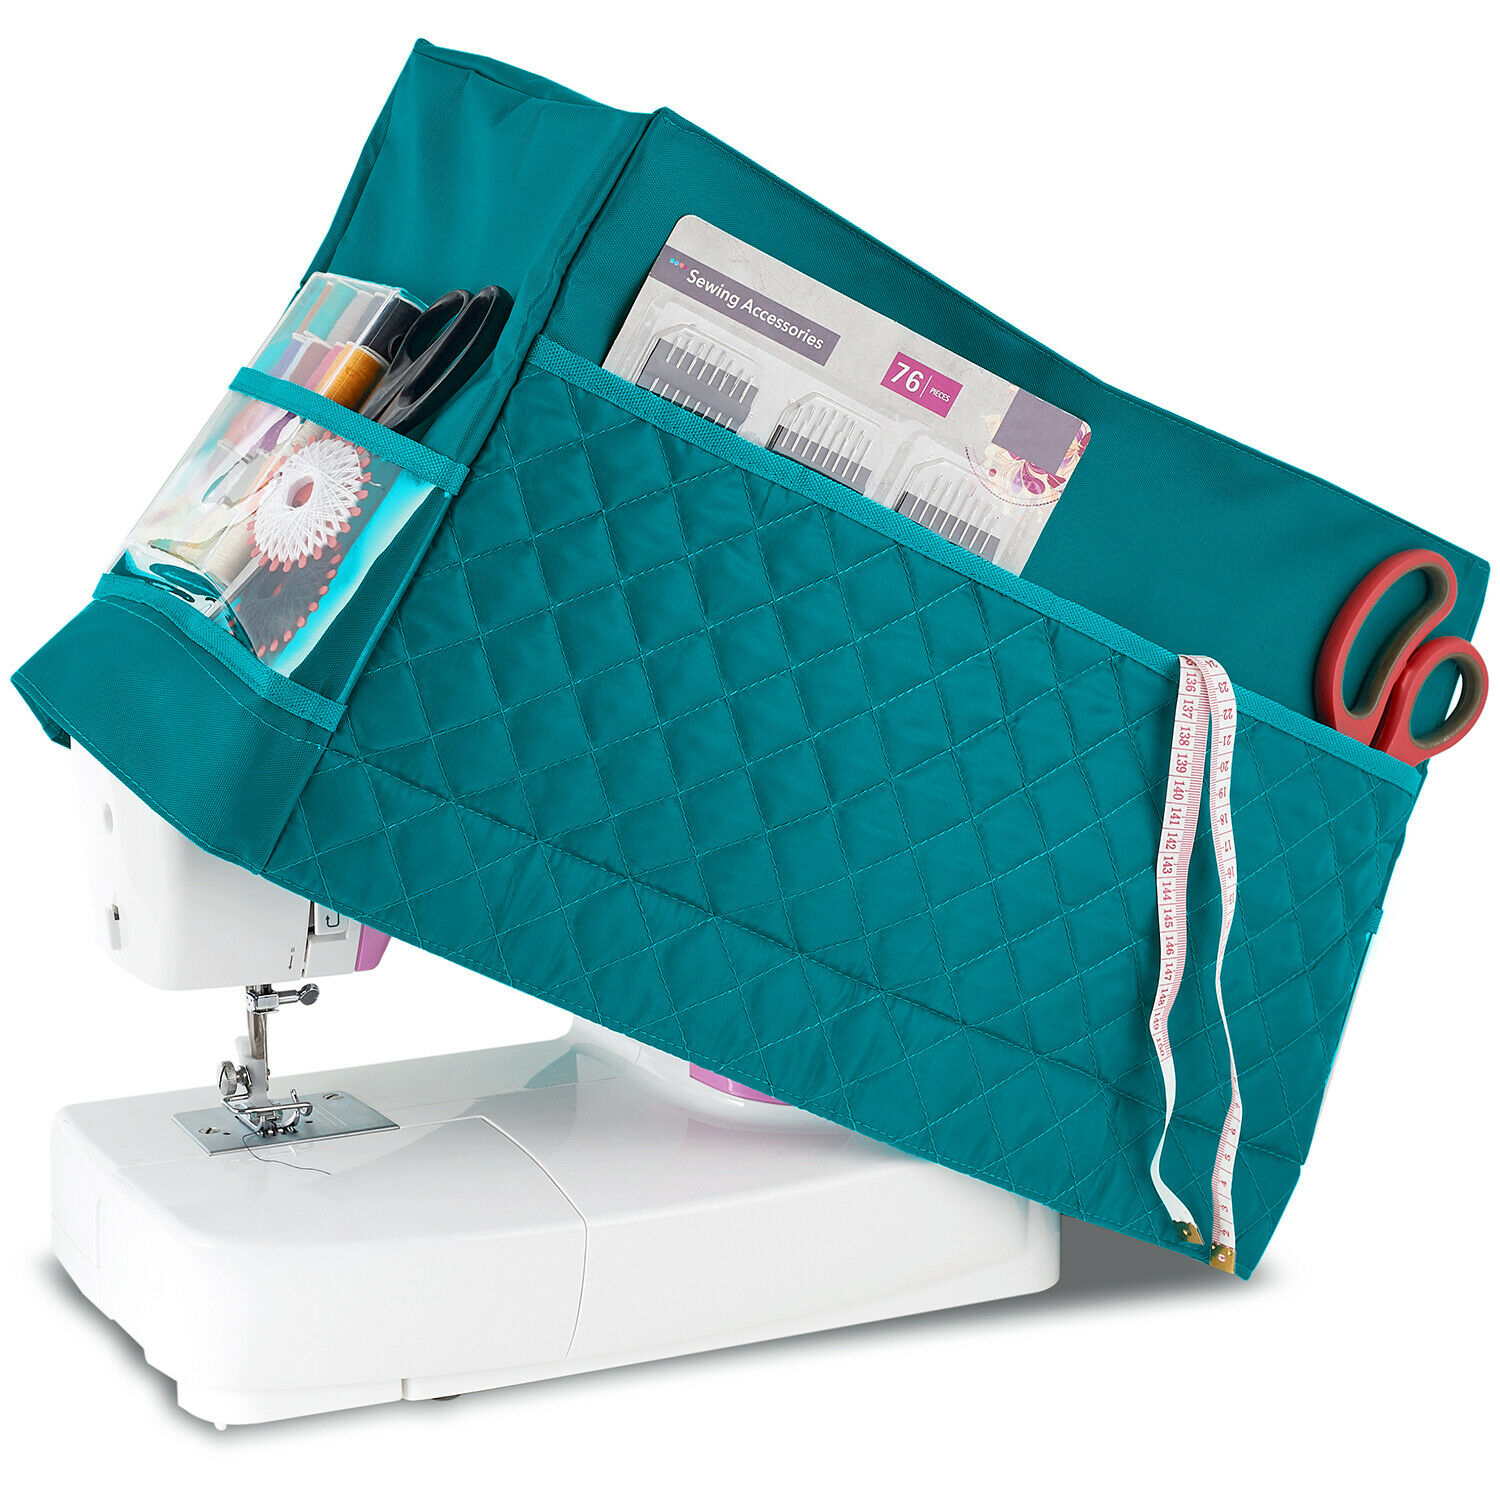 Sewing Machine Dust Cover For Most Standard Singer & Brother Machine (turquoise)